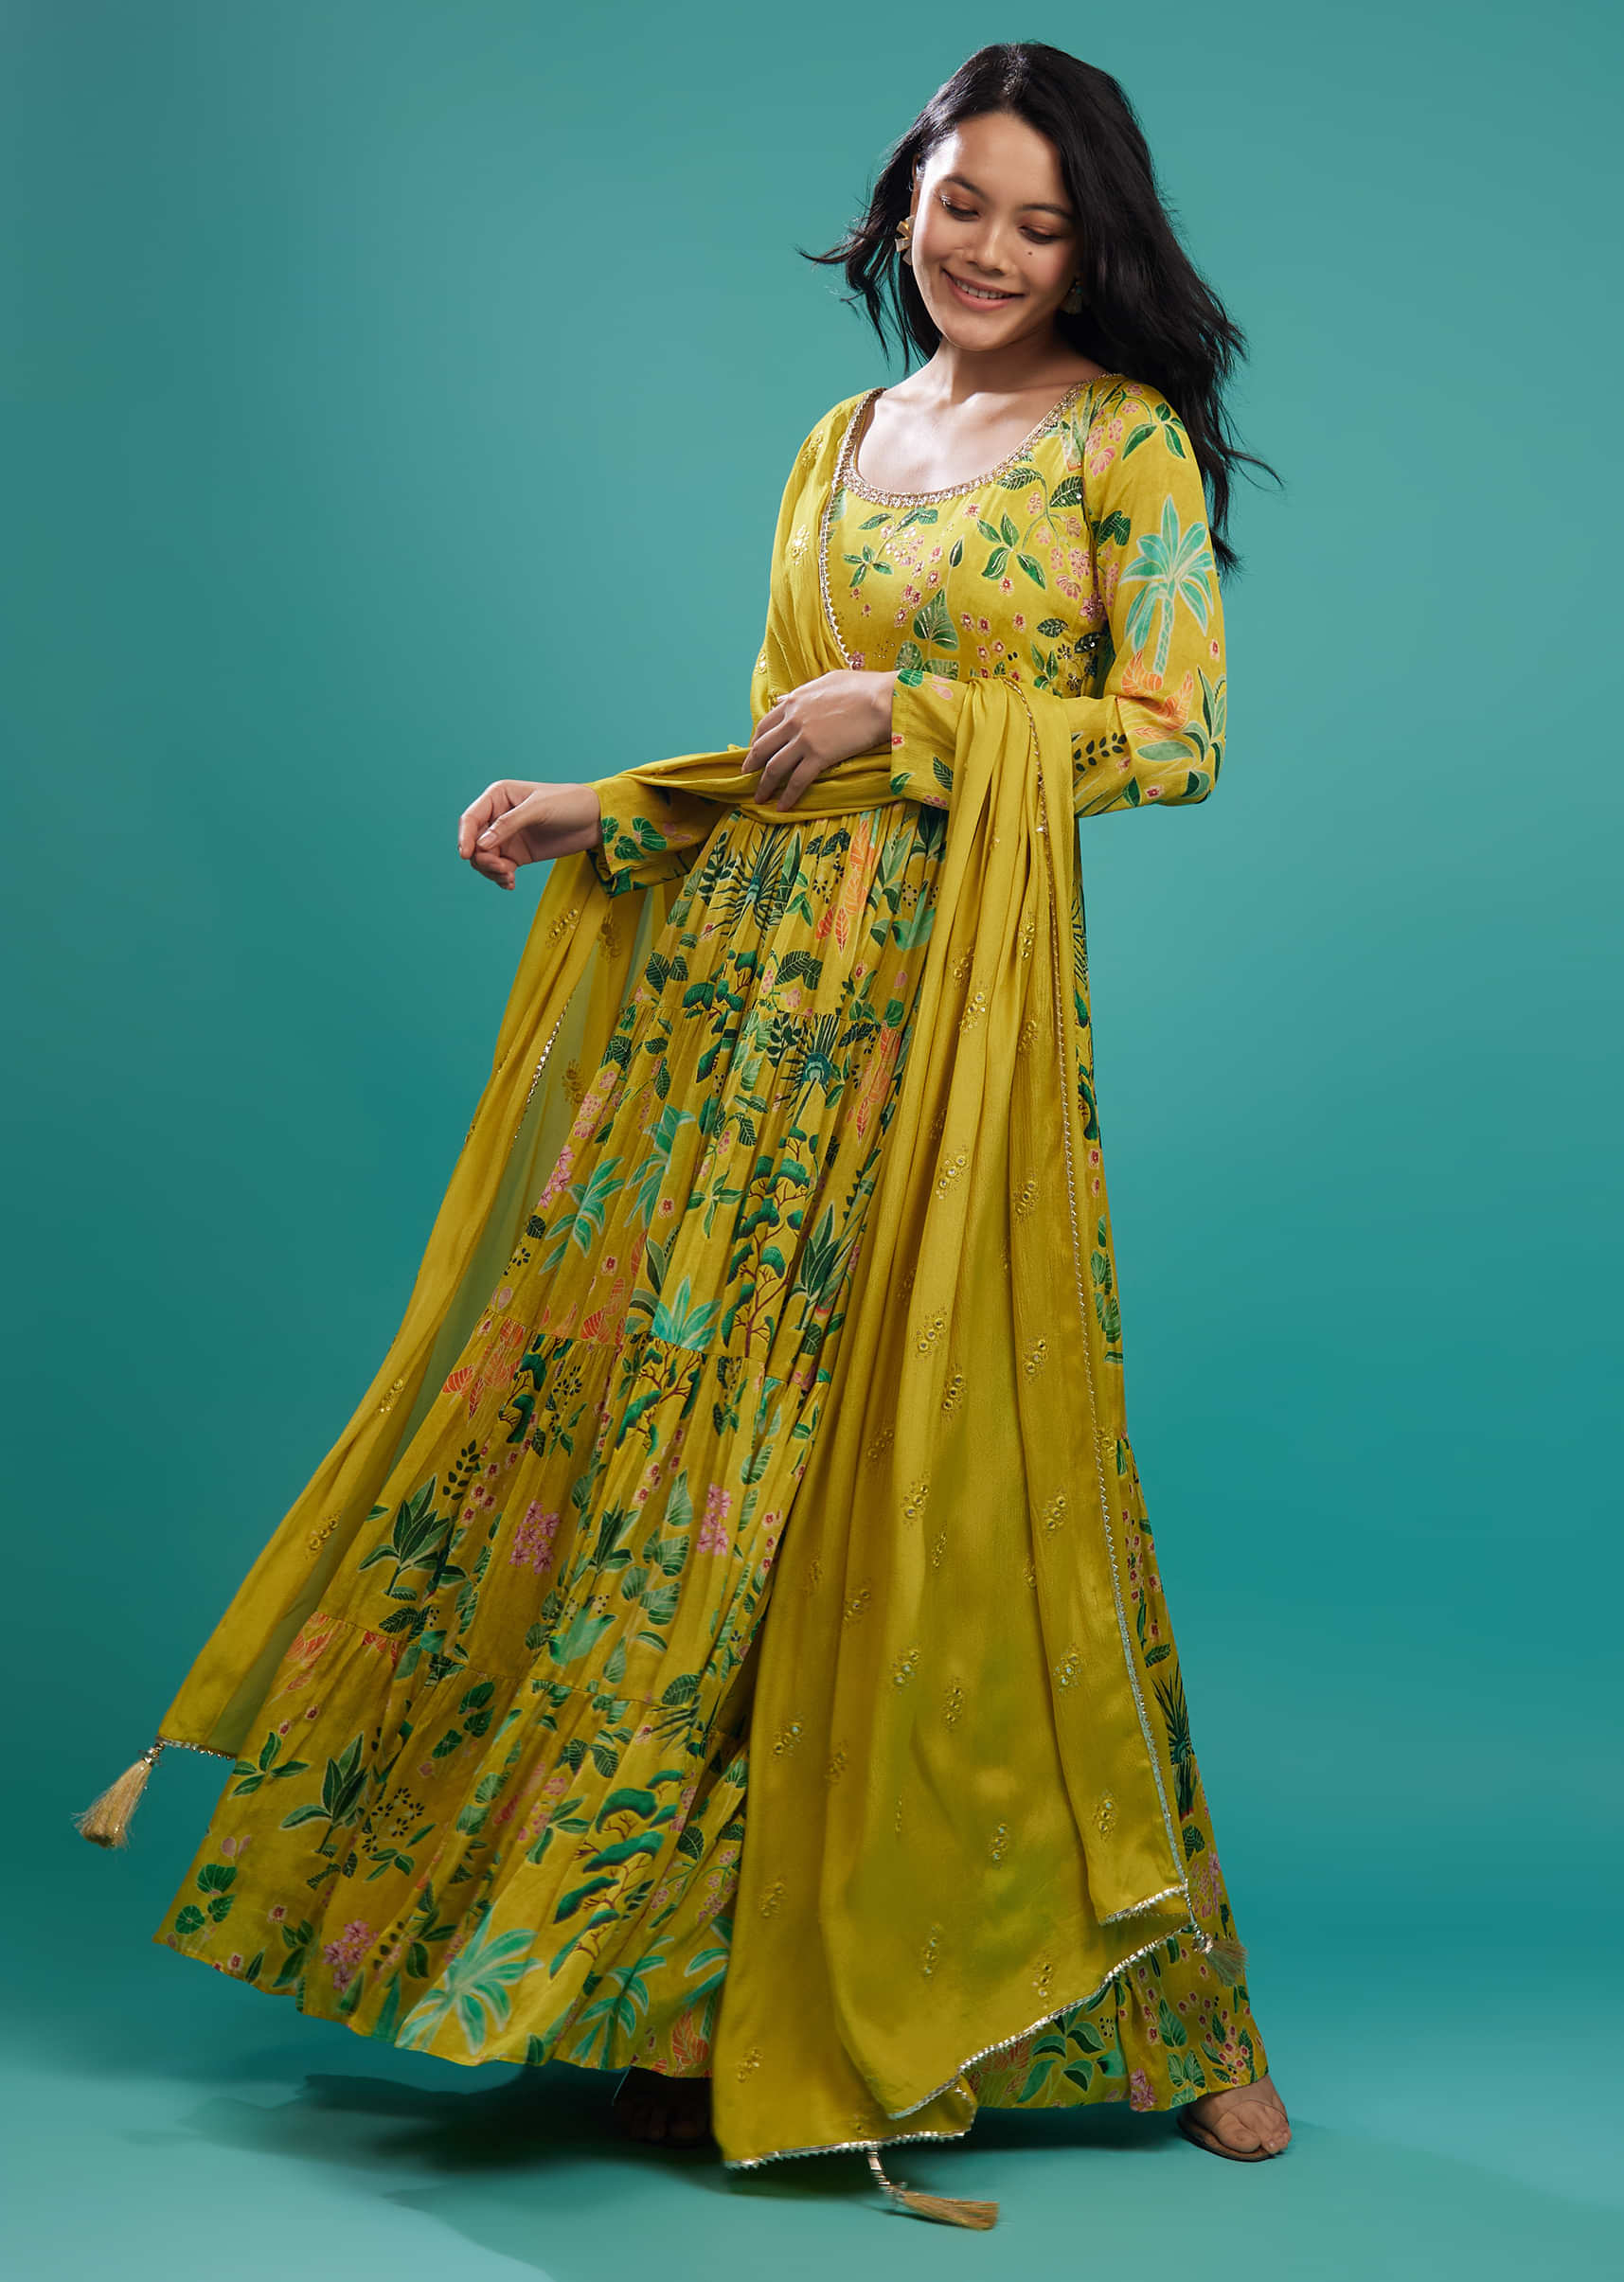 Celery Green Chinon Tiered Floral Anarkali Suit